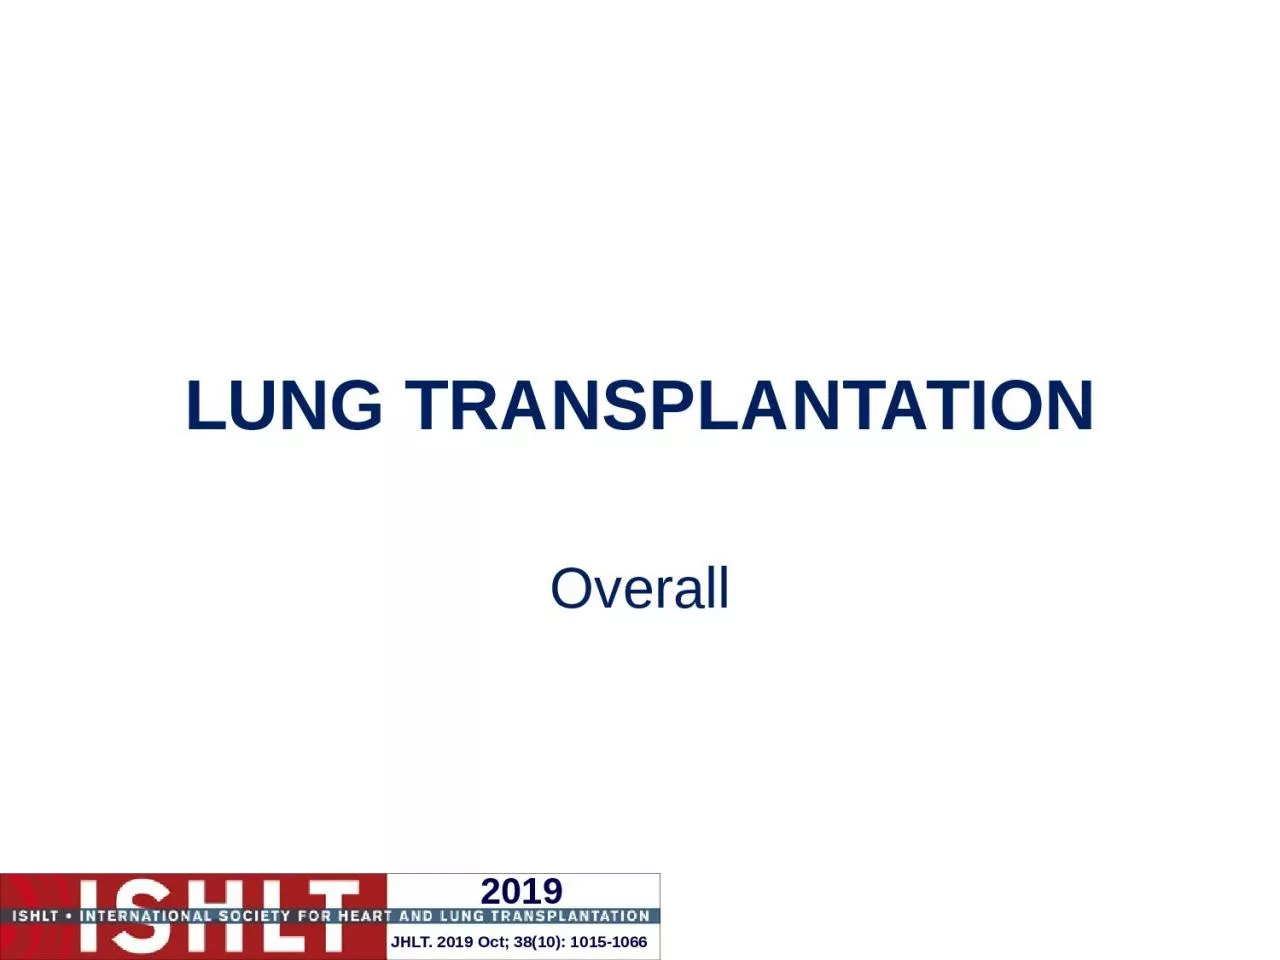 LUNG TRANSPLANTATION Overall